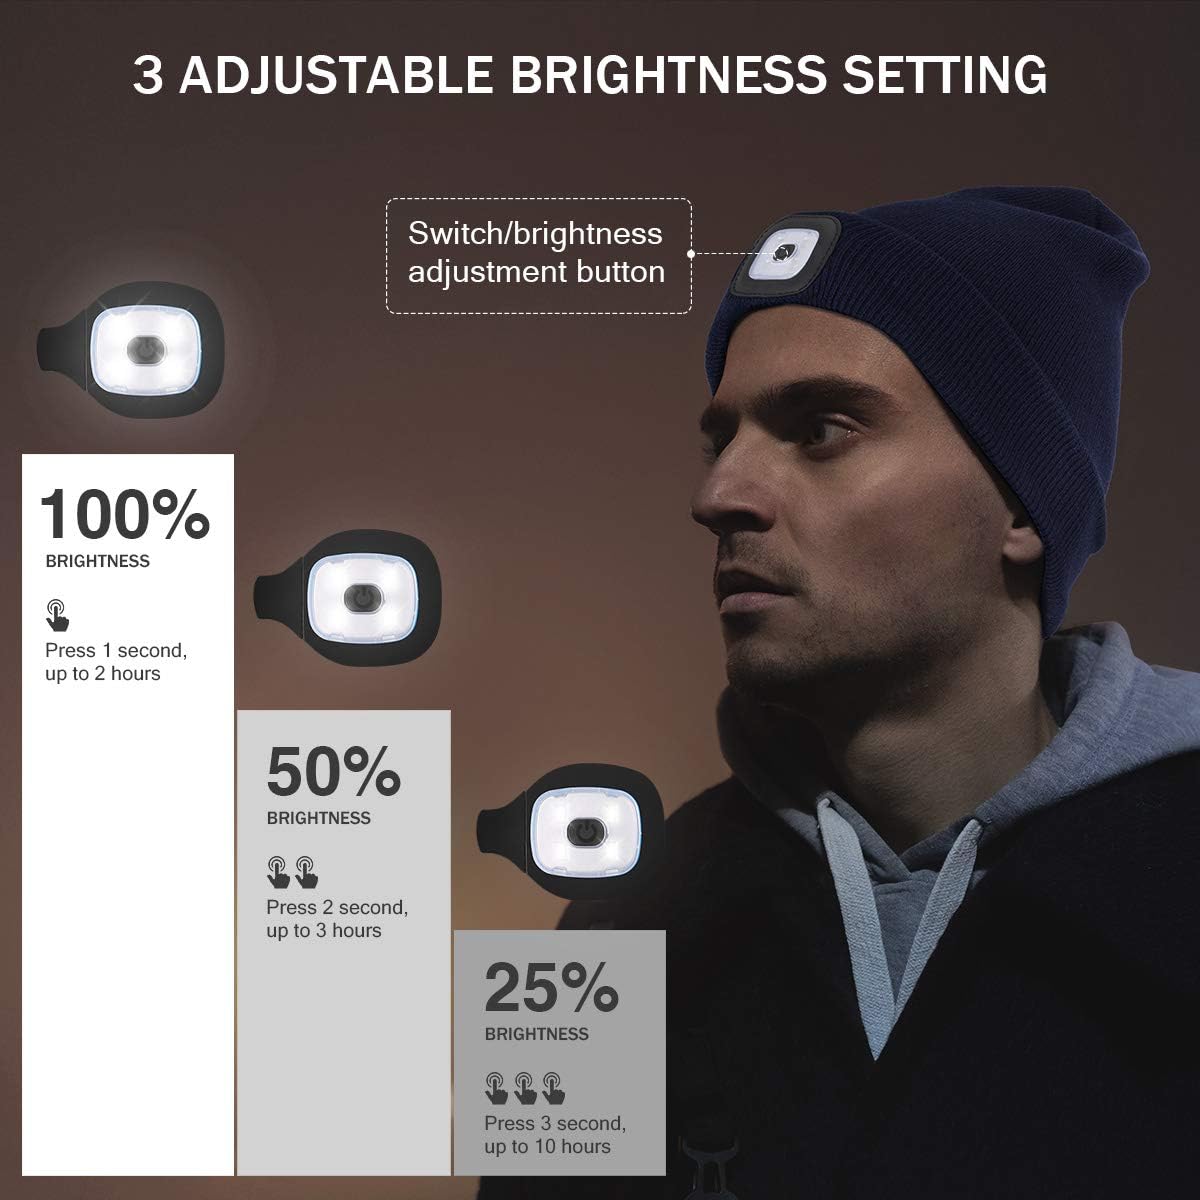 Beanie with Light, LED Beanie Hat with The Light Rechargable Flashlight Hat Headlamp Beanie,Night Lighted Hat Flashlight Women Men Gifts for Dad Him Husband